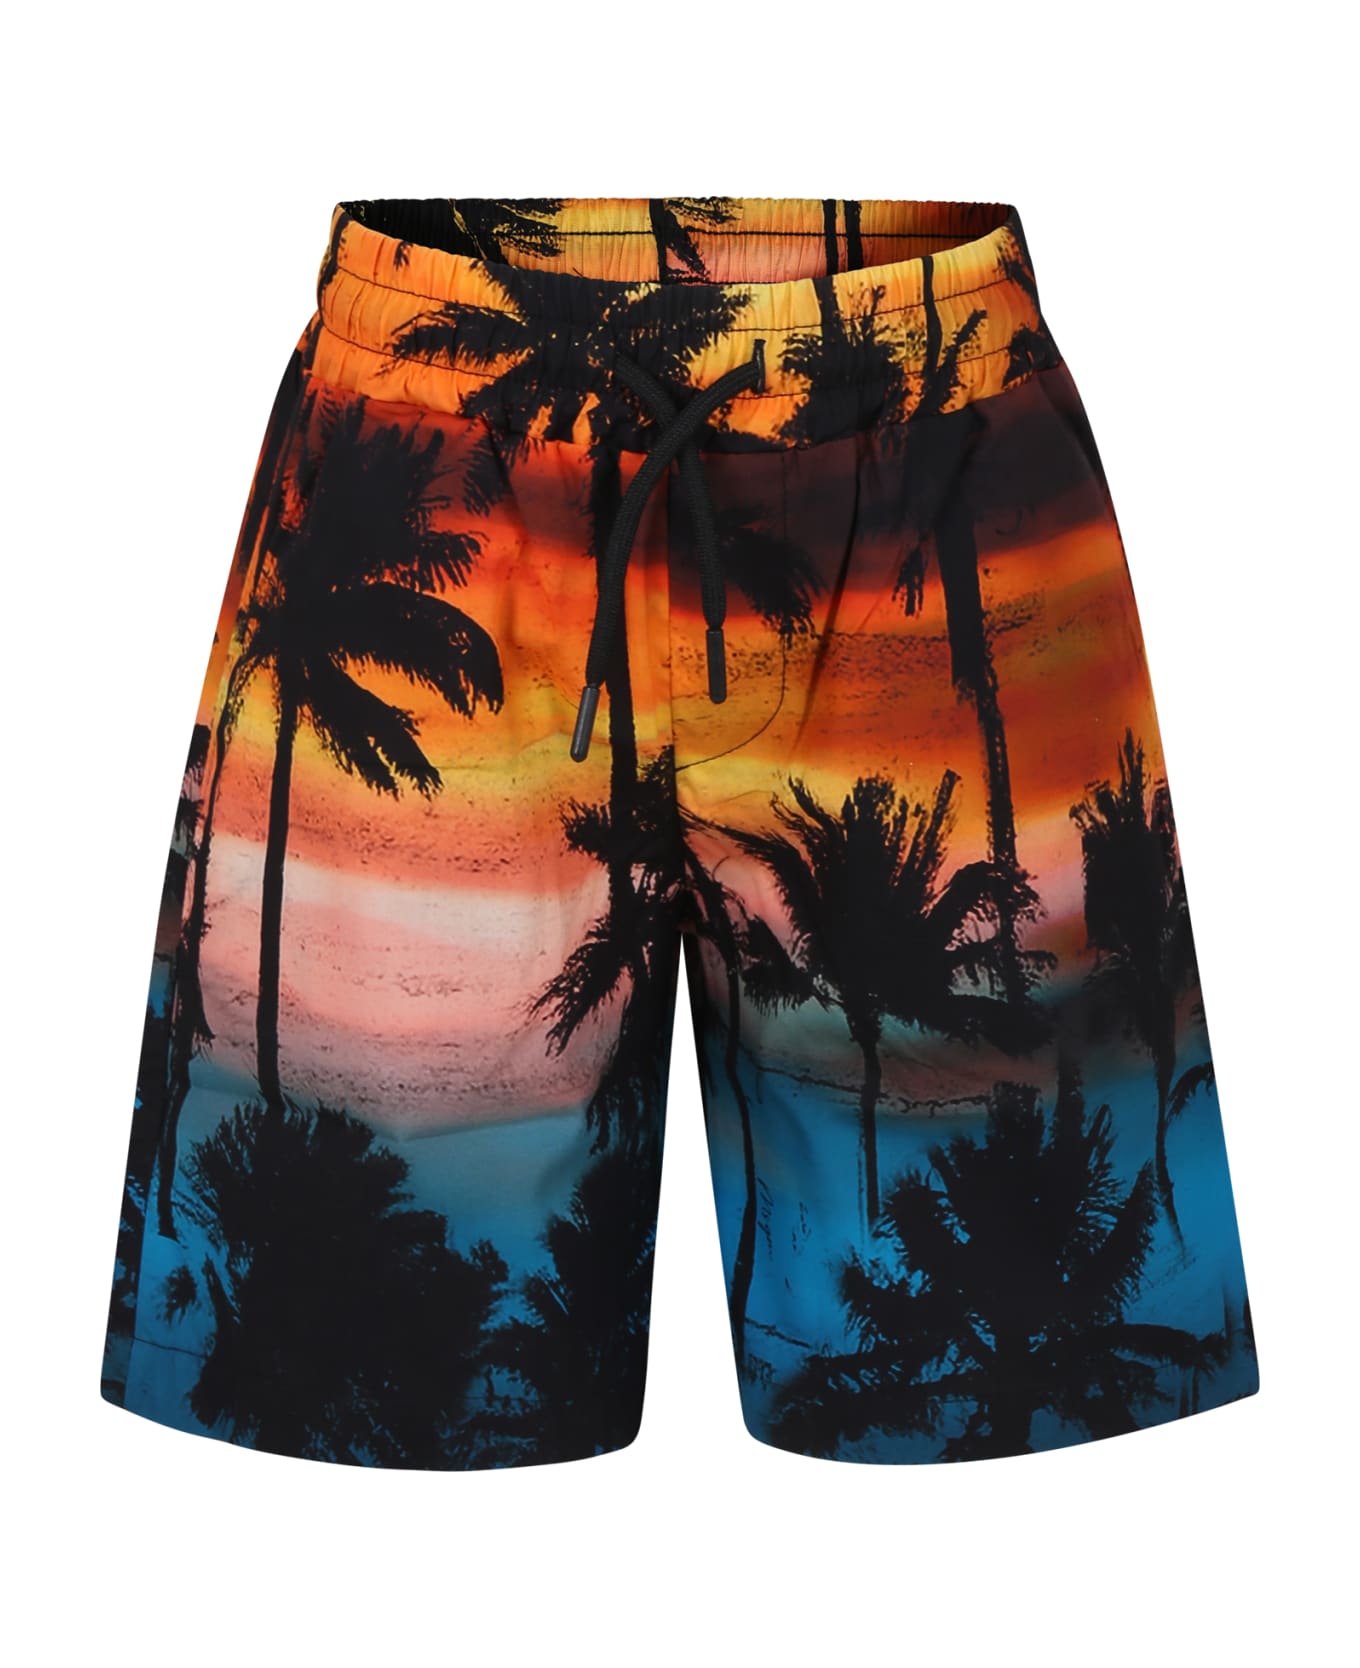 MSGM Orange Shorts For Boy With Palm Tree Print - Multicolore